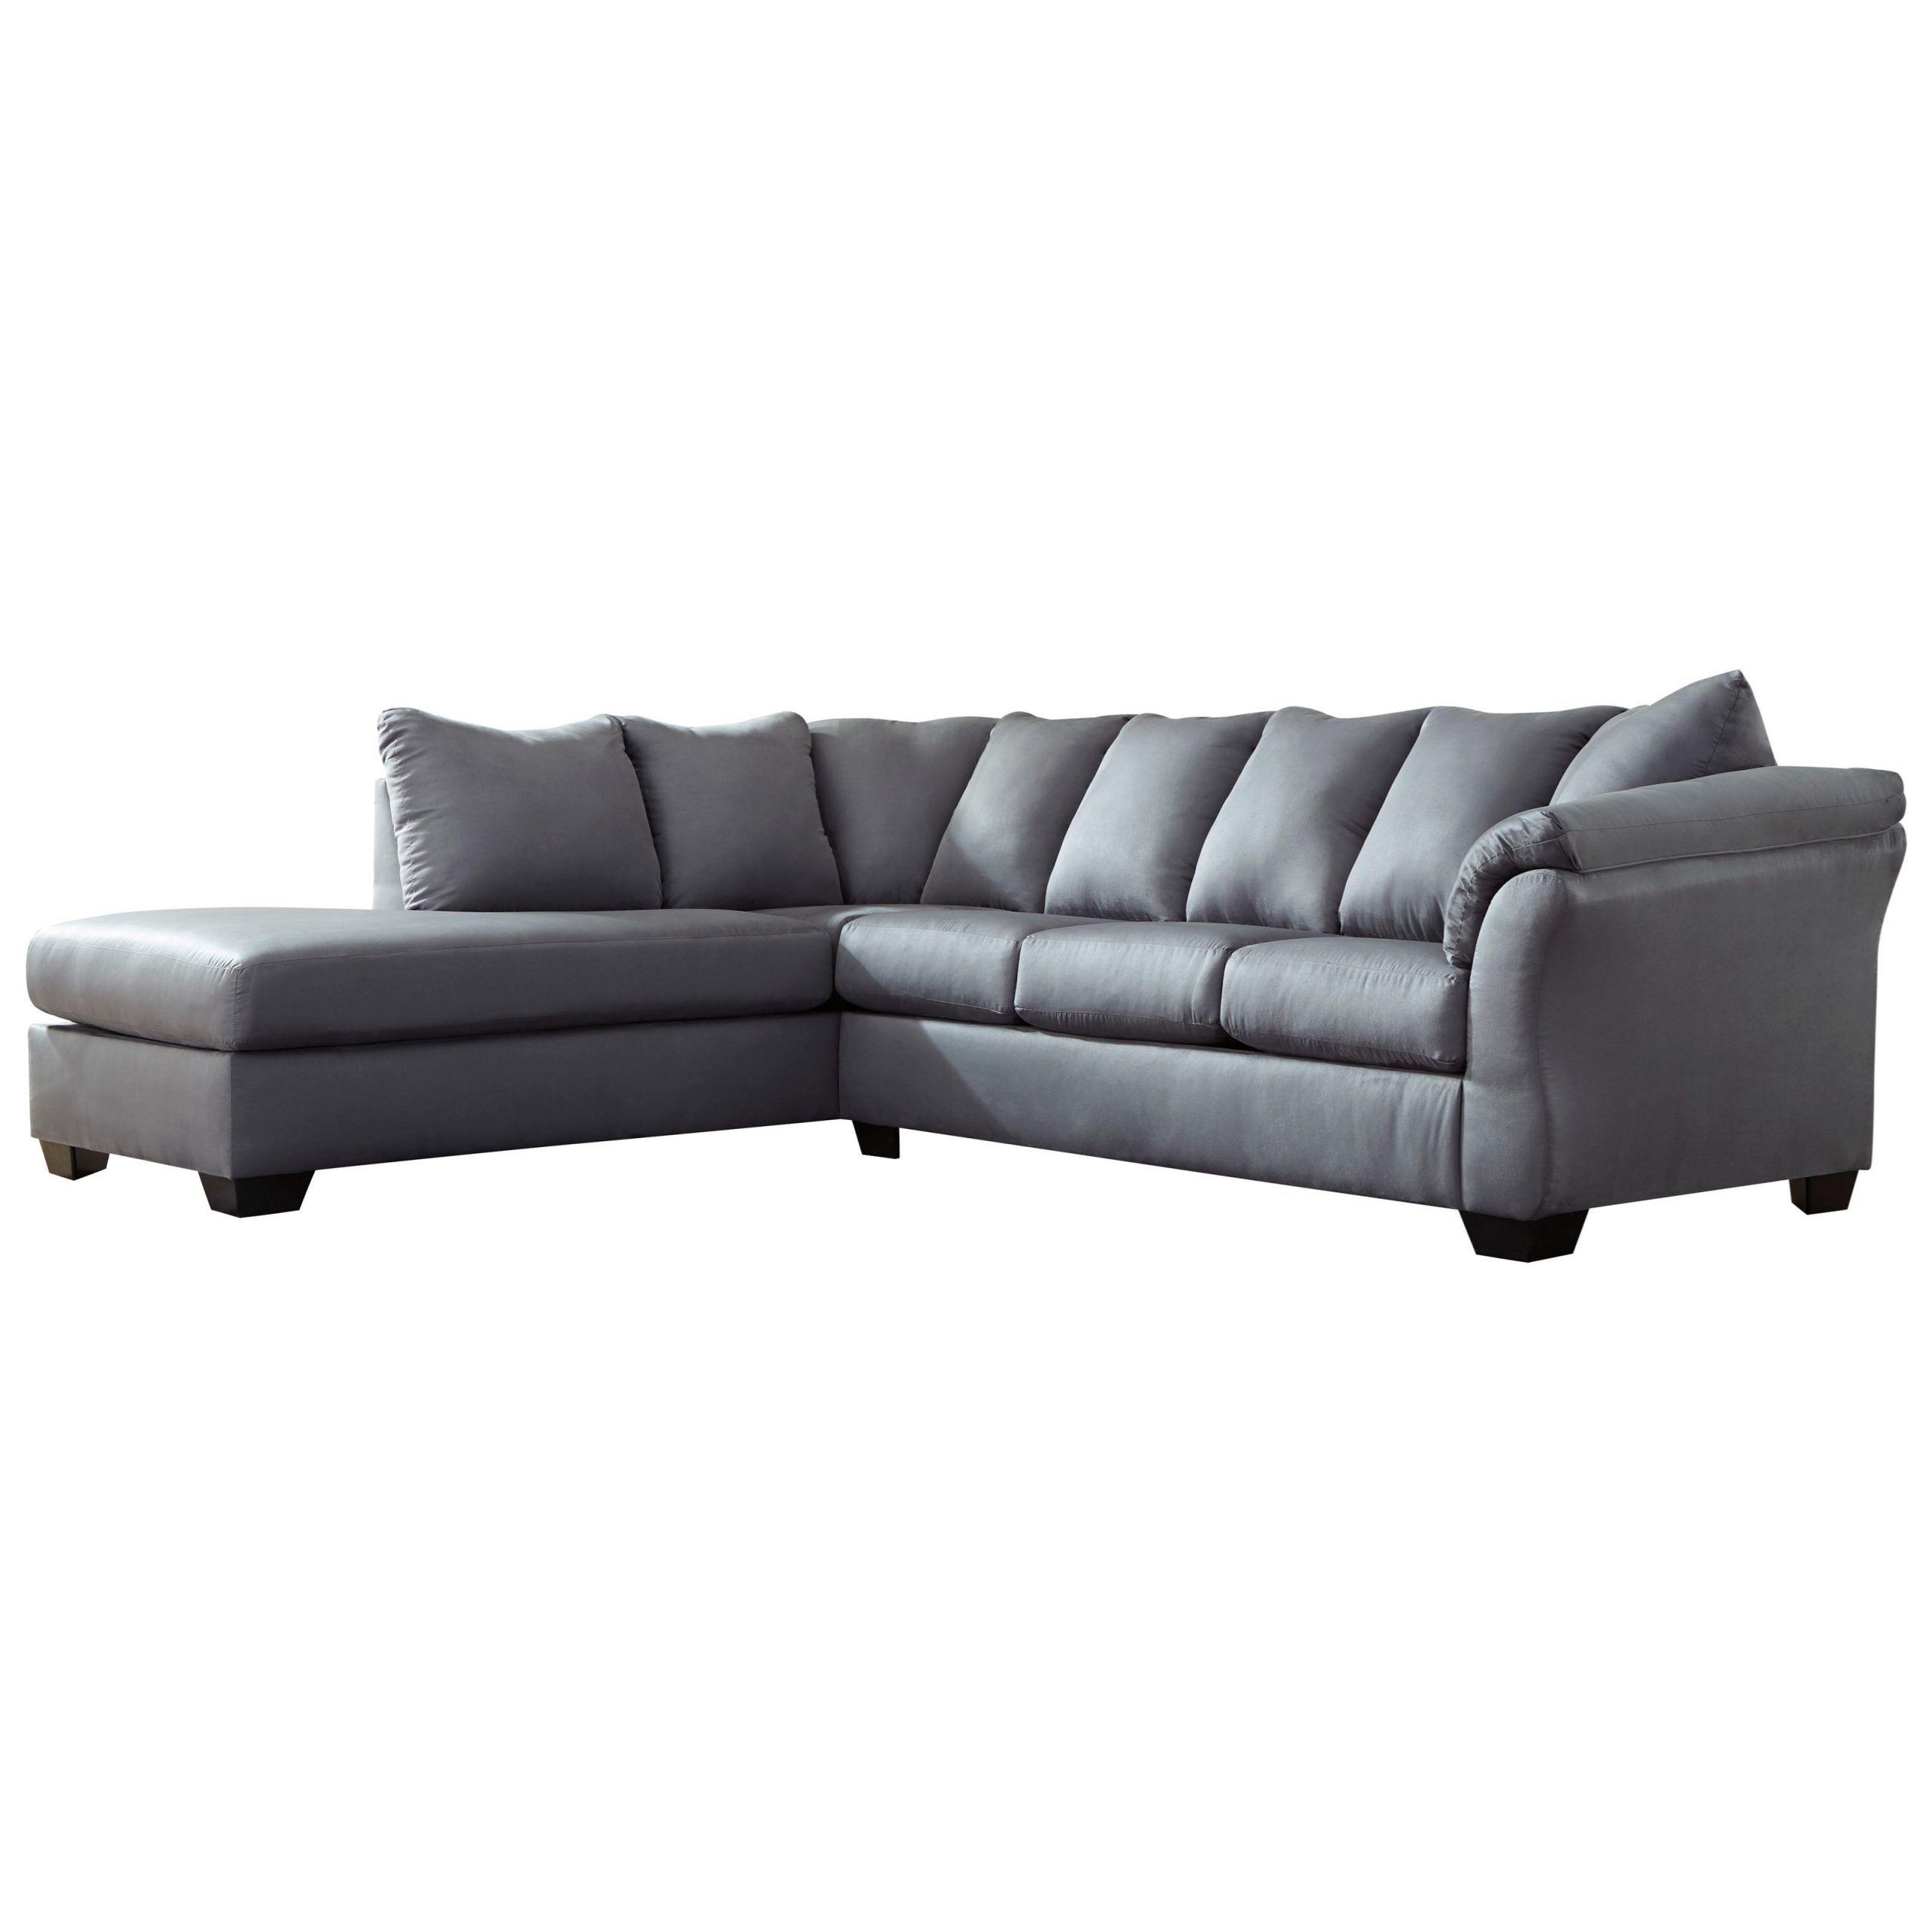 Signature Designashley Darcy – Steel Contemporary 2 In 2pc Burland Contemporary Chaise Sectional Sofas (View 4 of 15)